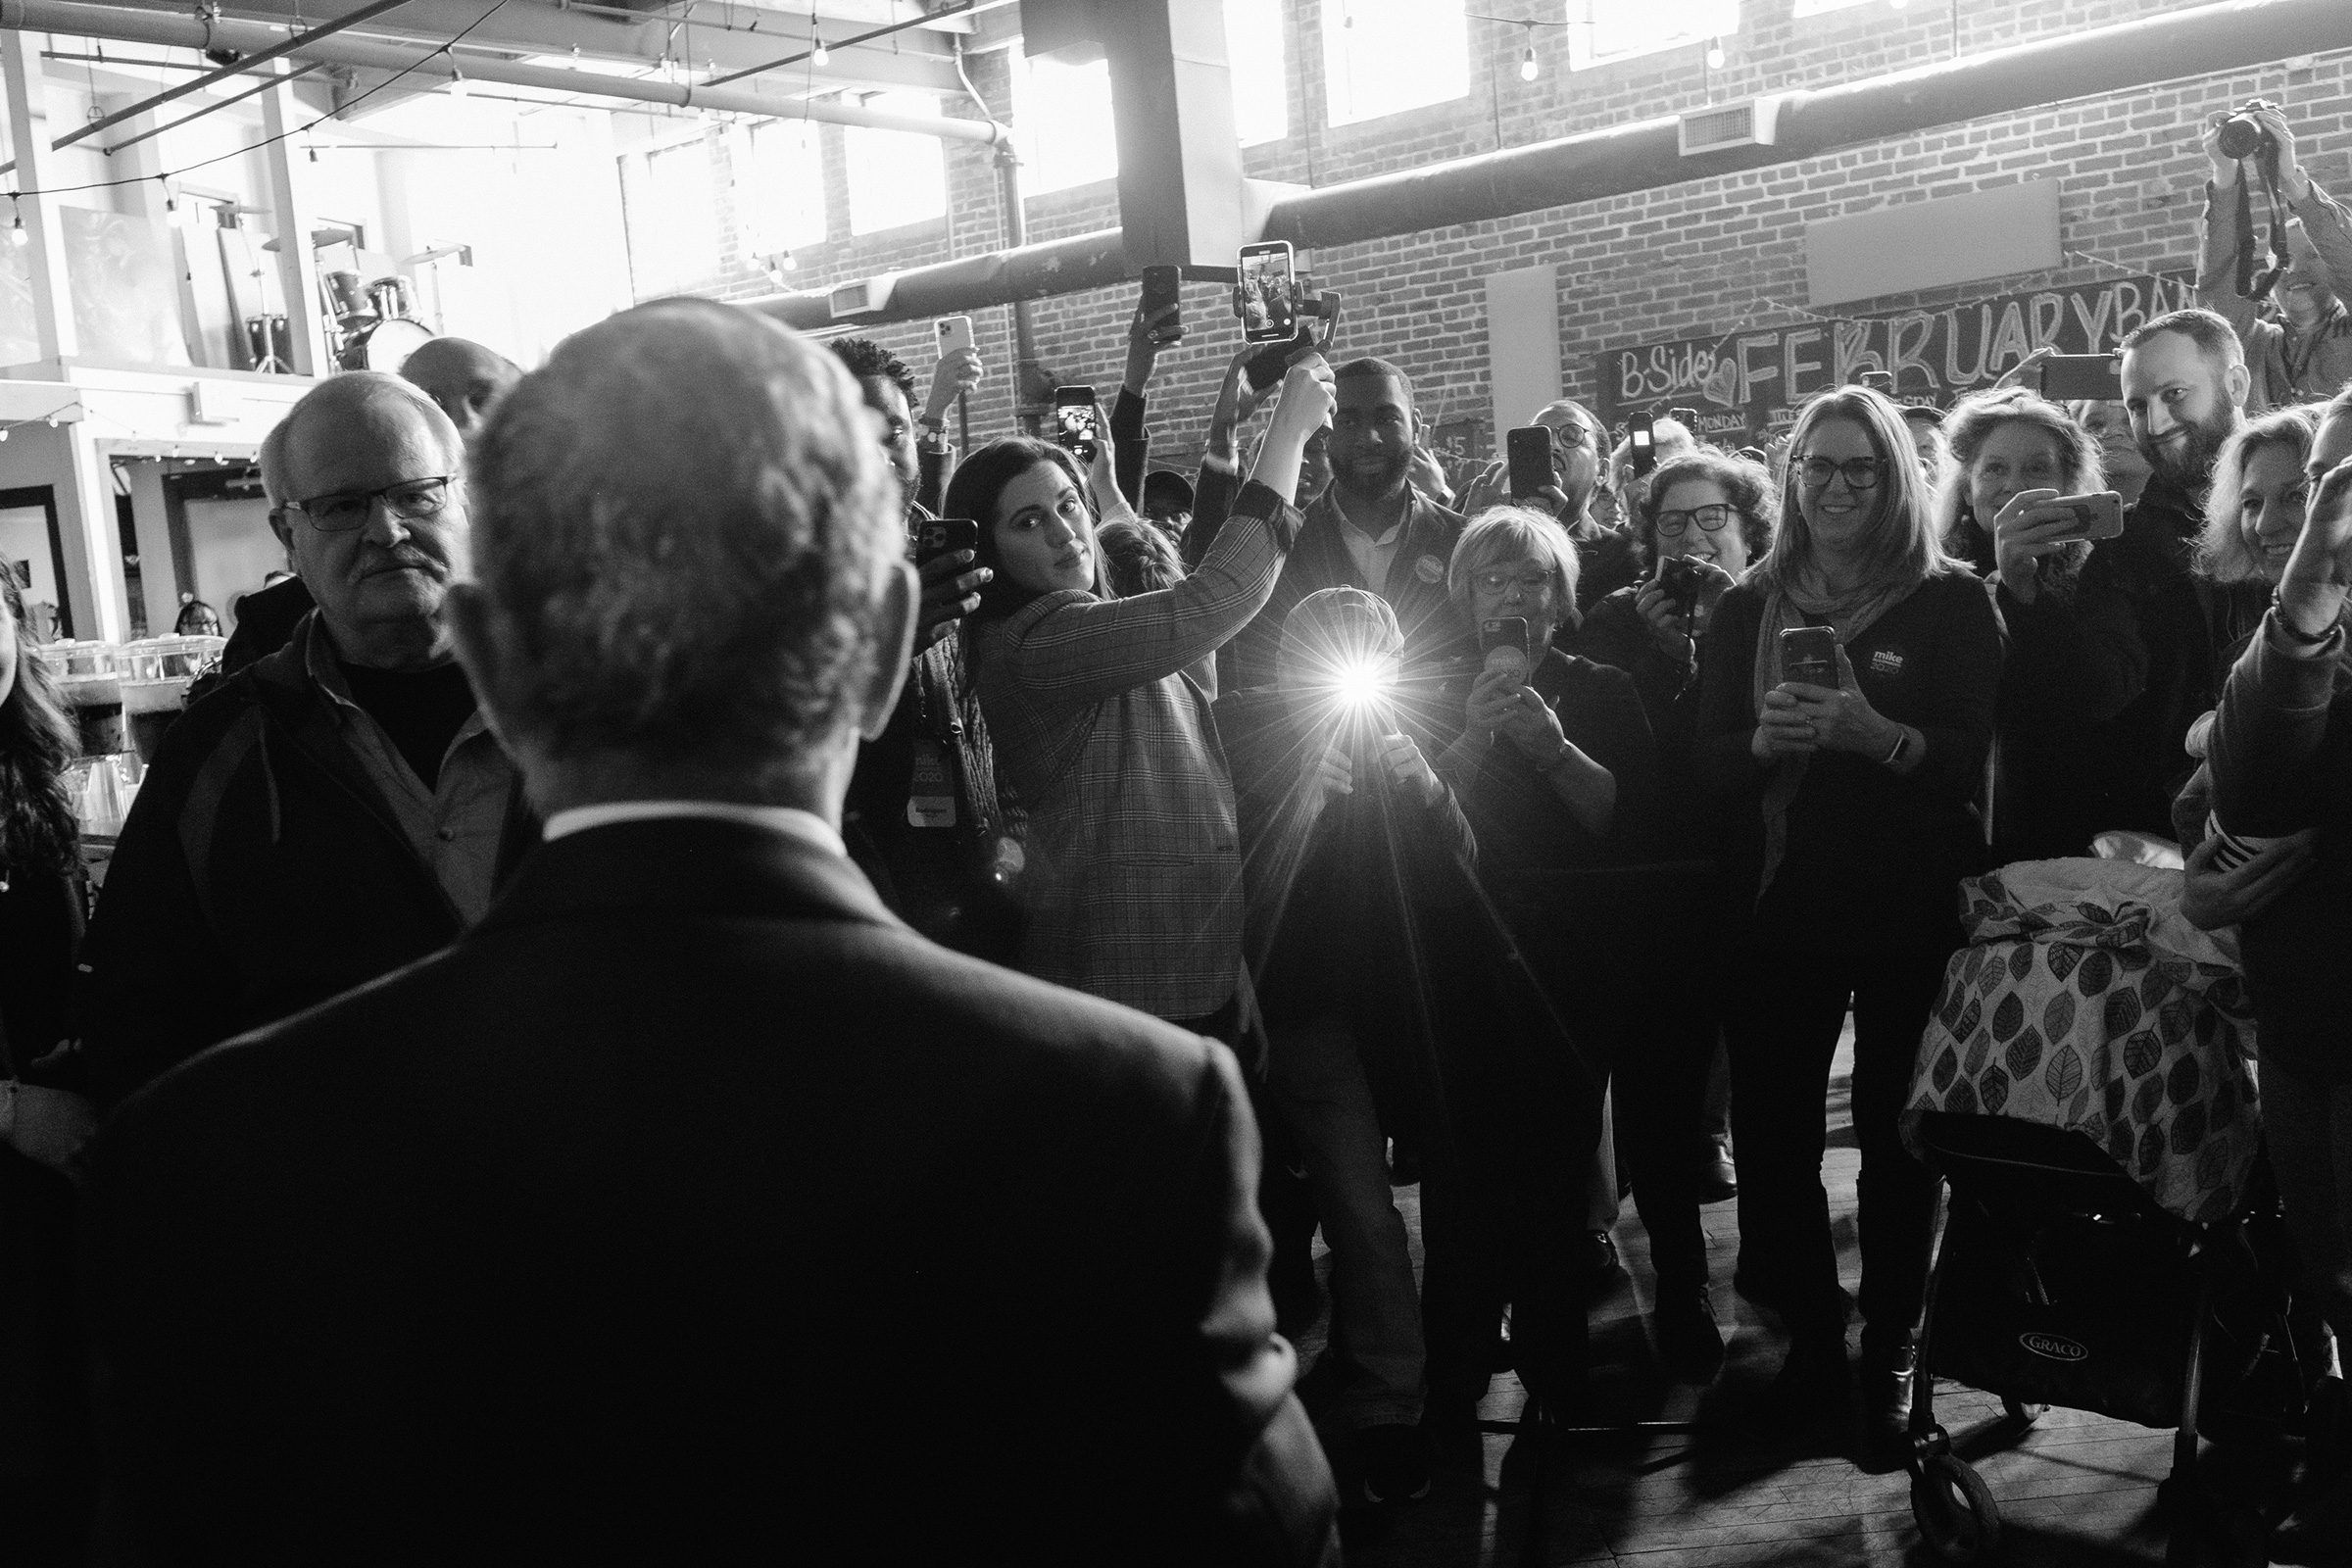 Bloomberg speaks at a rally in Memphis on Feb. 28. (Christopher Lee for TIME)